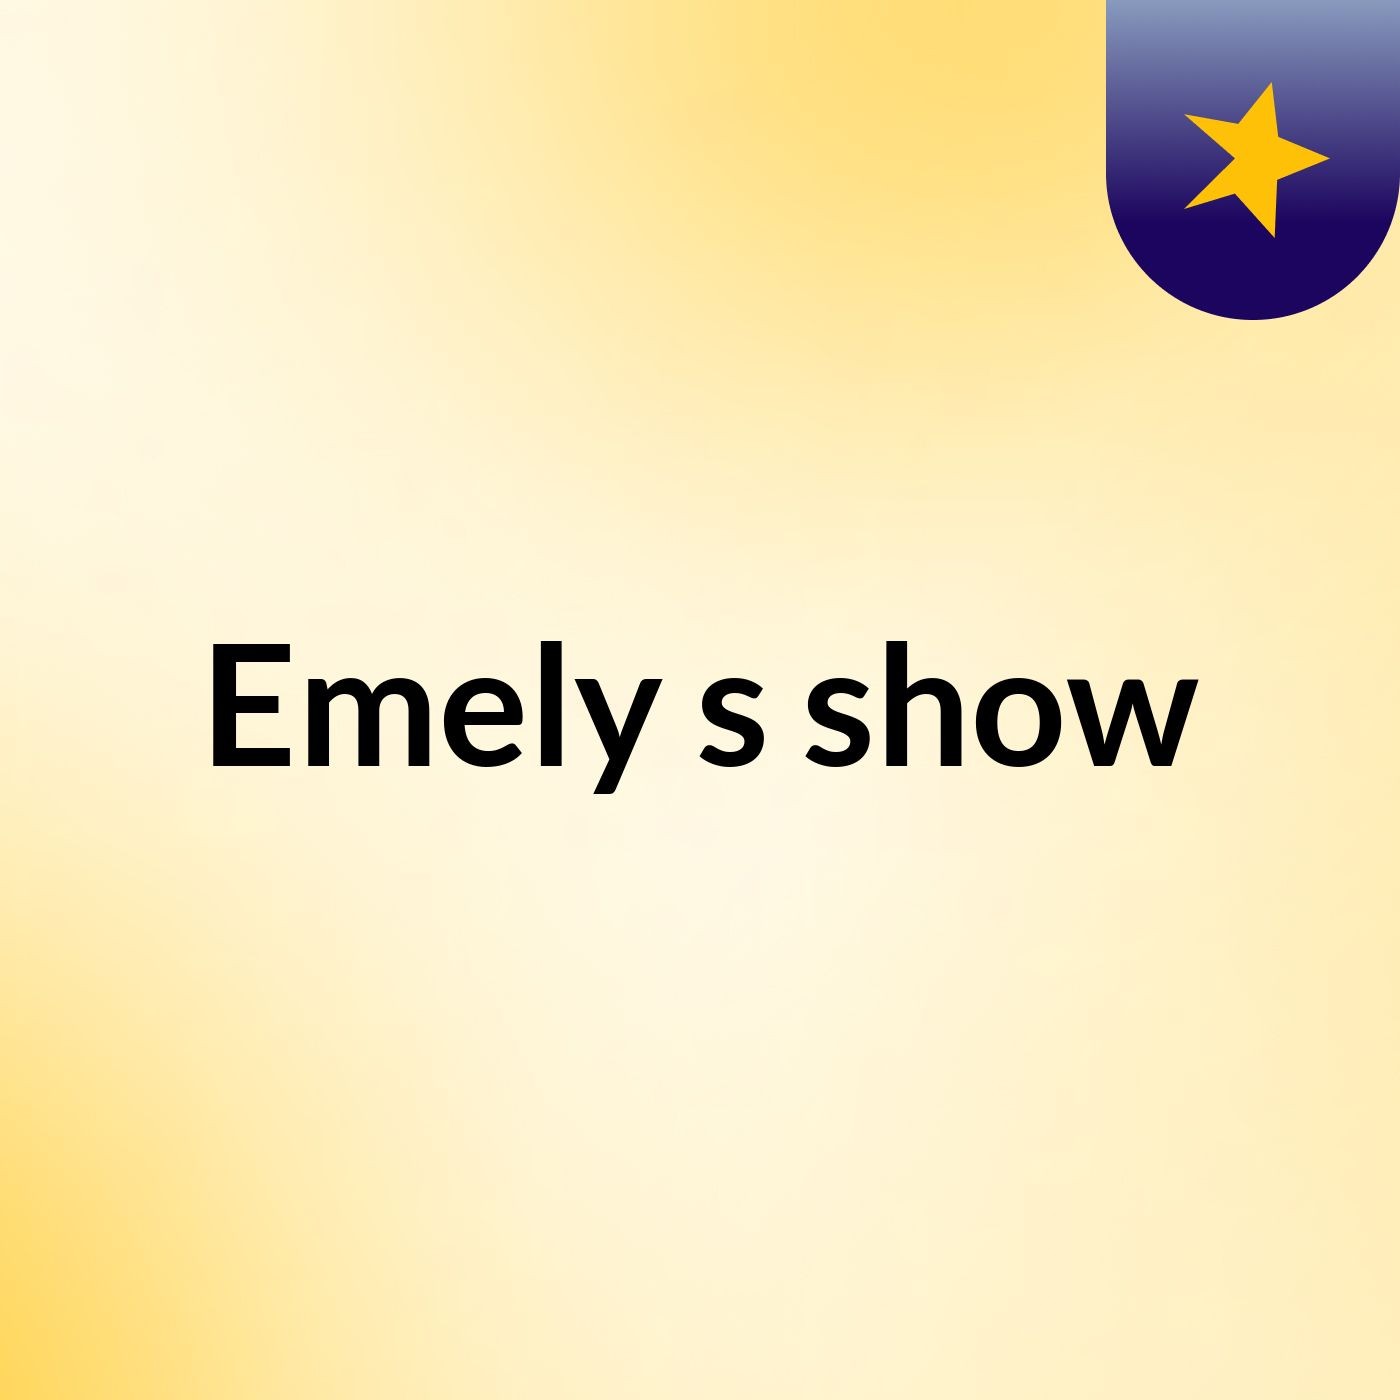 Emely's show